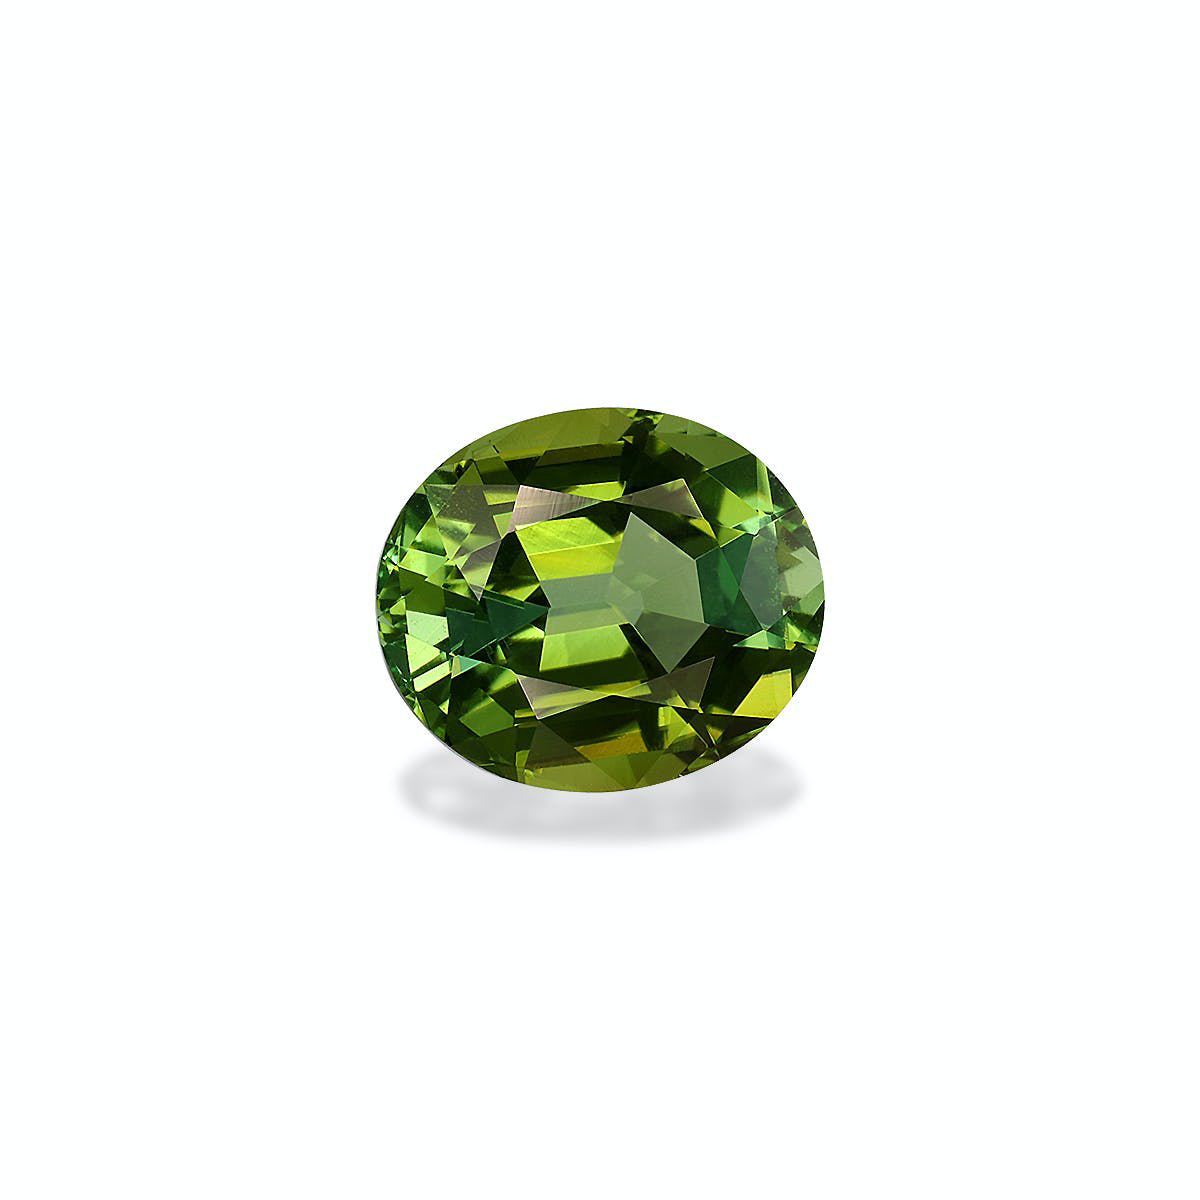 Picture of Lime Green Tourmaline 3.35ct - 10x8mm (TG1578)